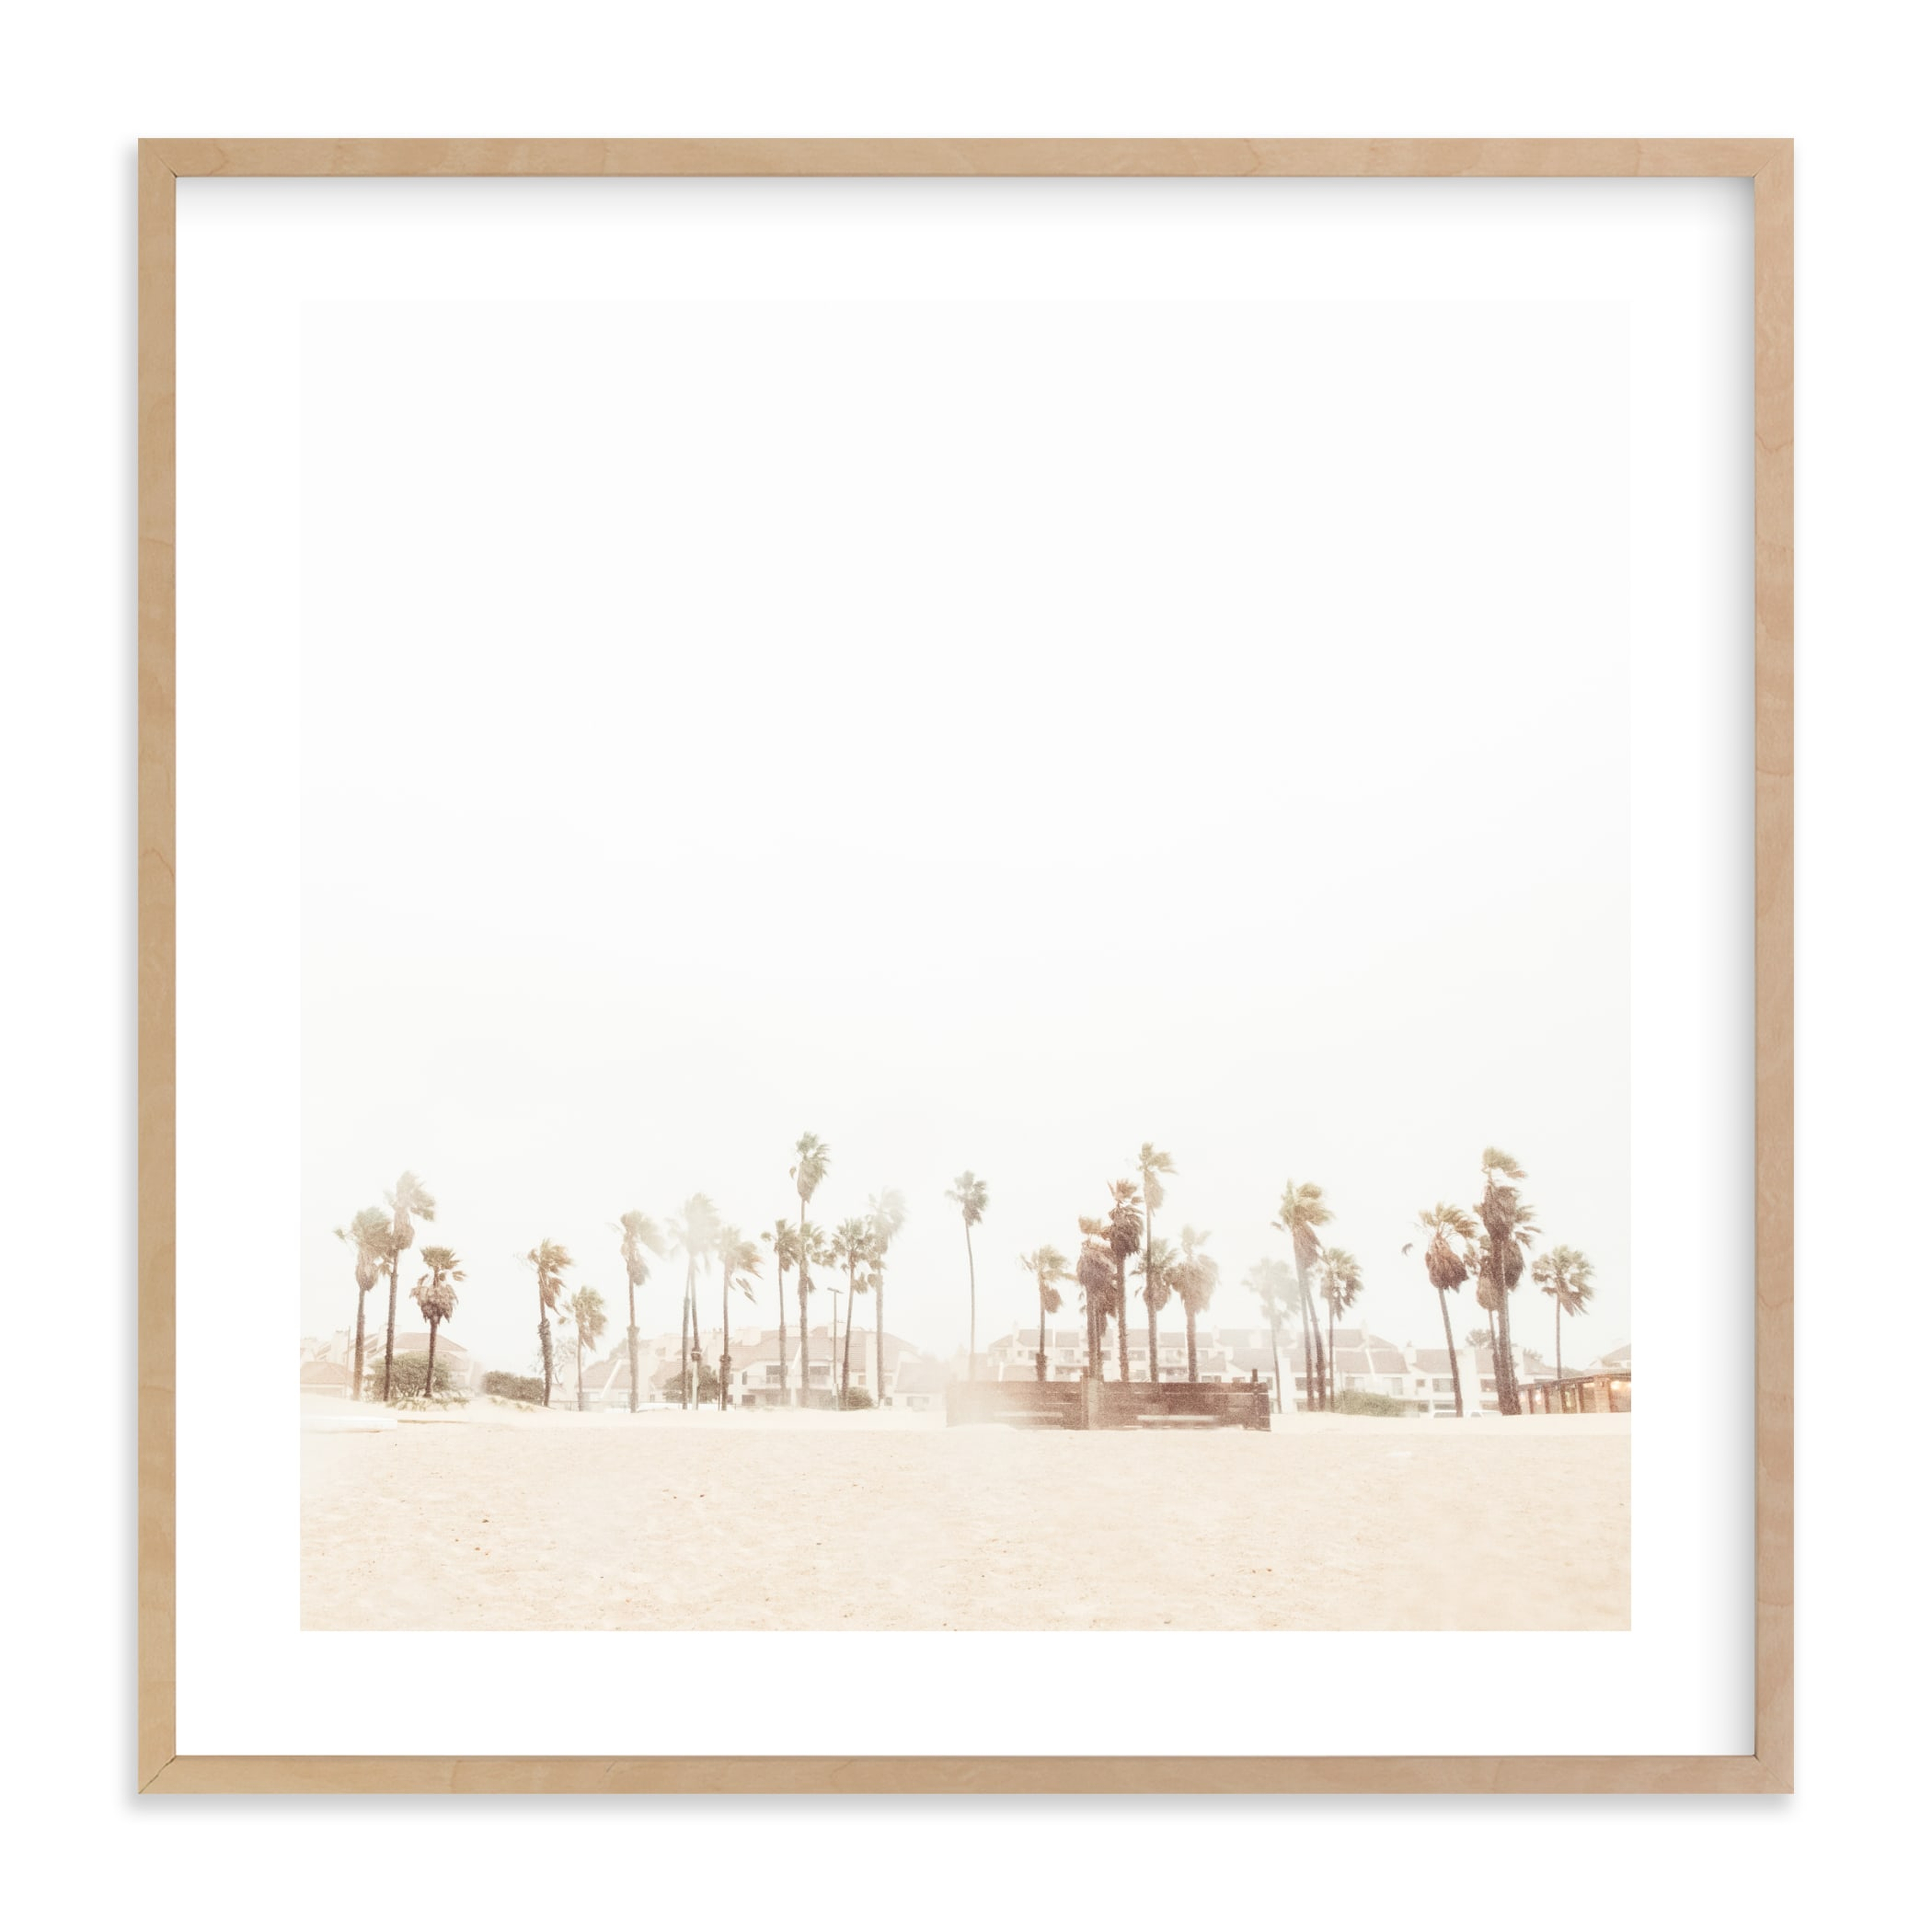 Stormy Palms with white border - Minted